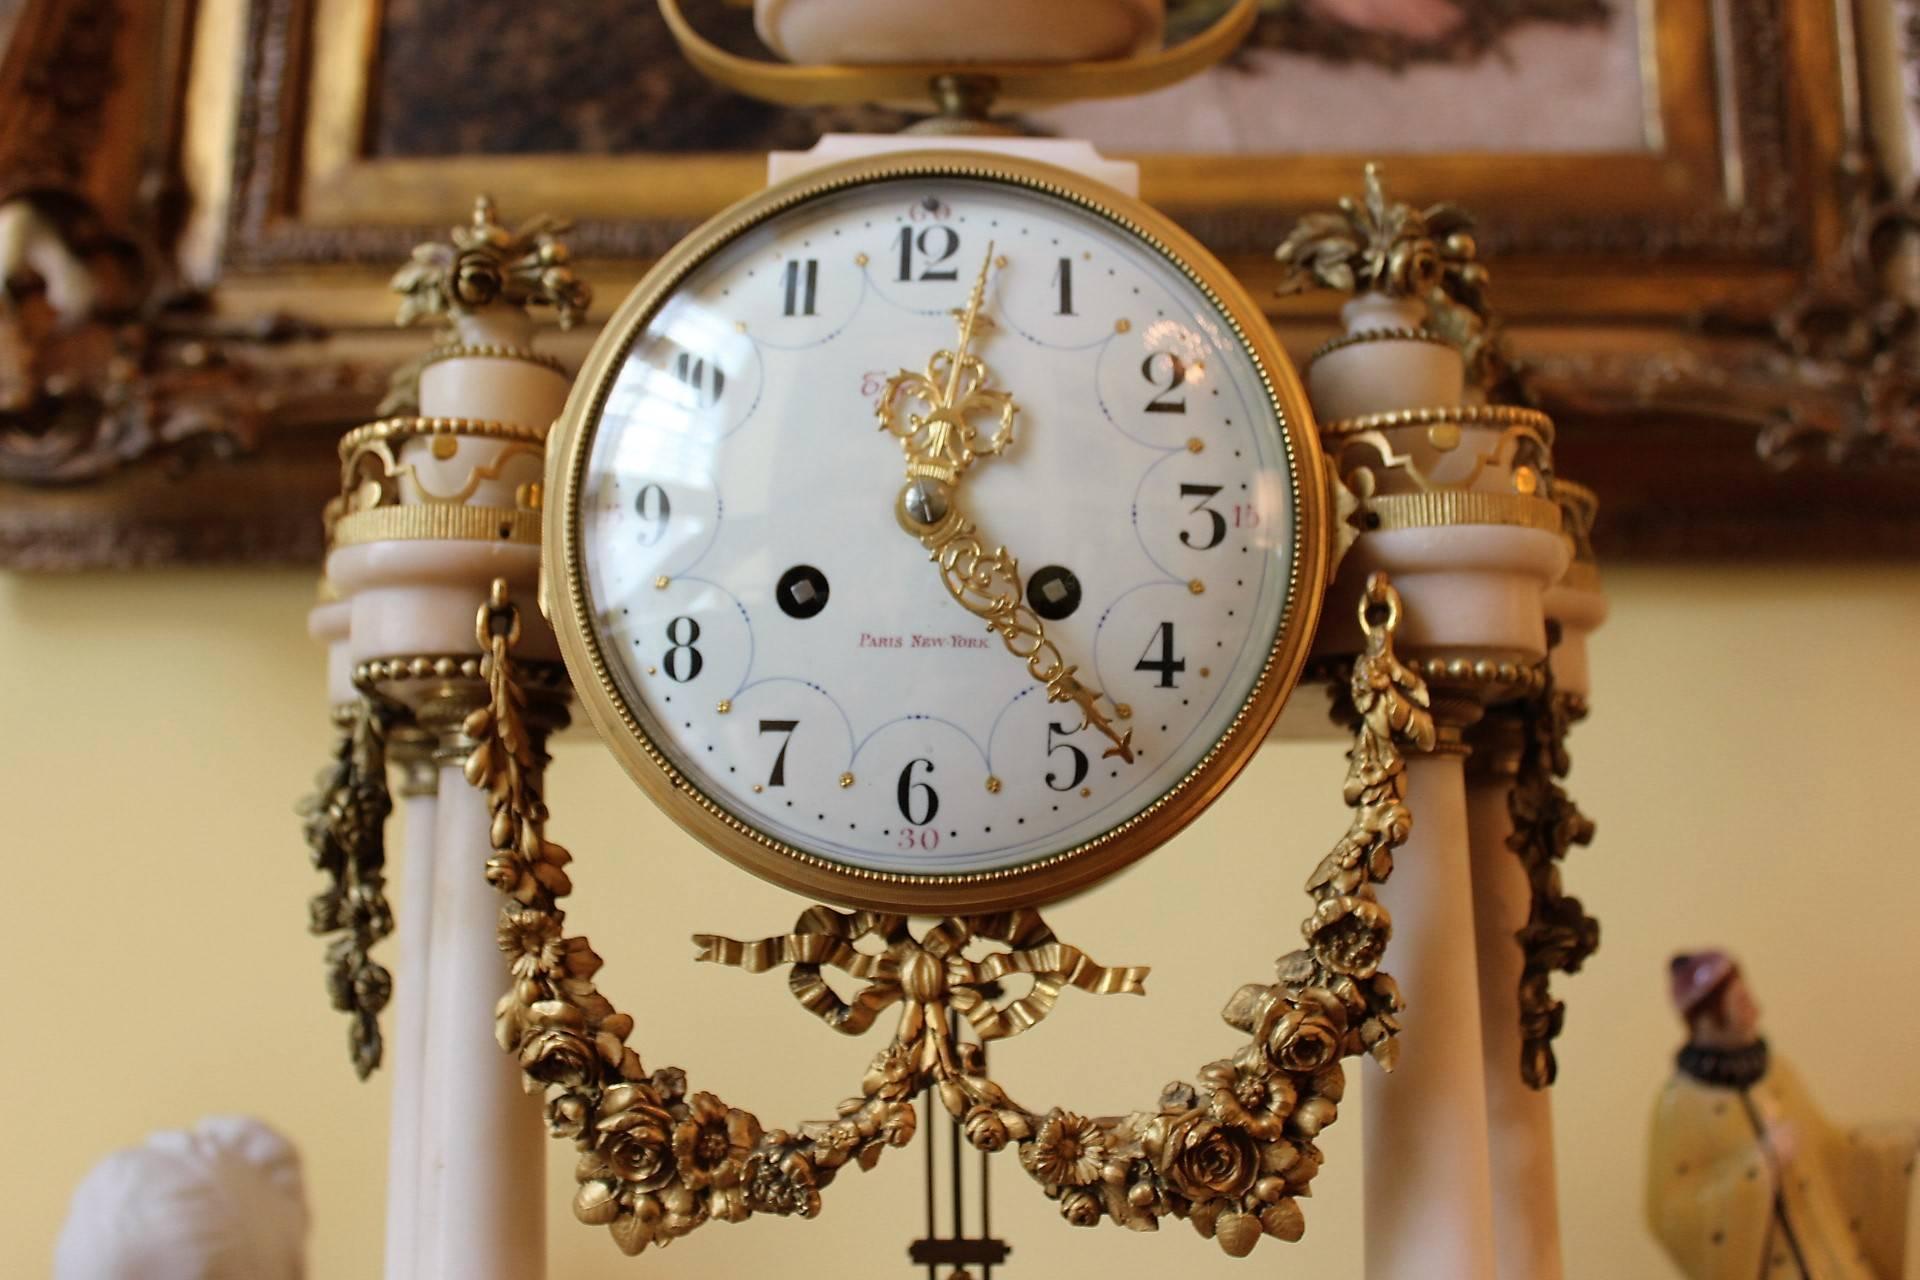 Stunning white marble and ormolu-mounted clock marked Tiffany on the hand-painted porcelain dial. Clock strikes on the hour and half hour. Louis XV Style case with French works, recently cleaned and serviced. All clocks might need adjustment after